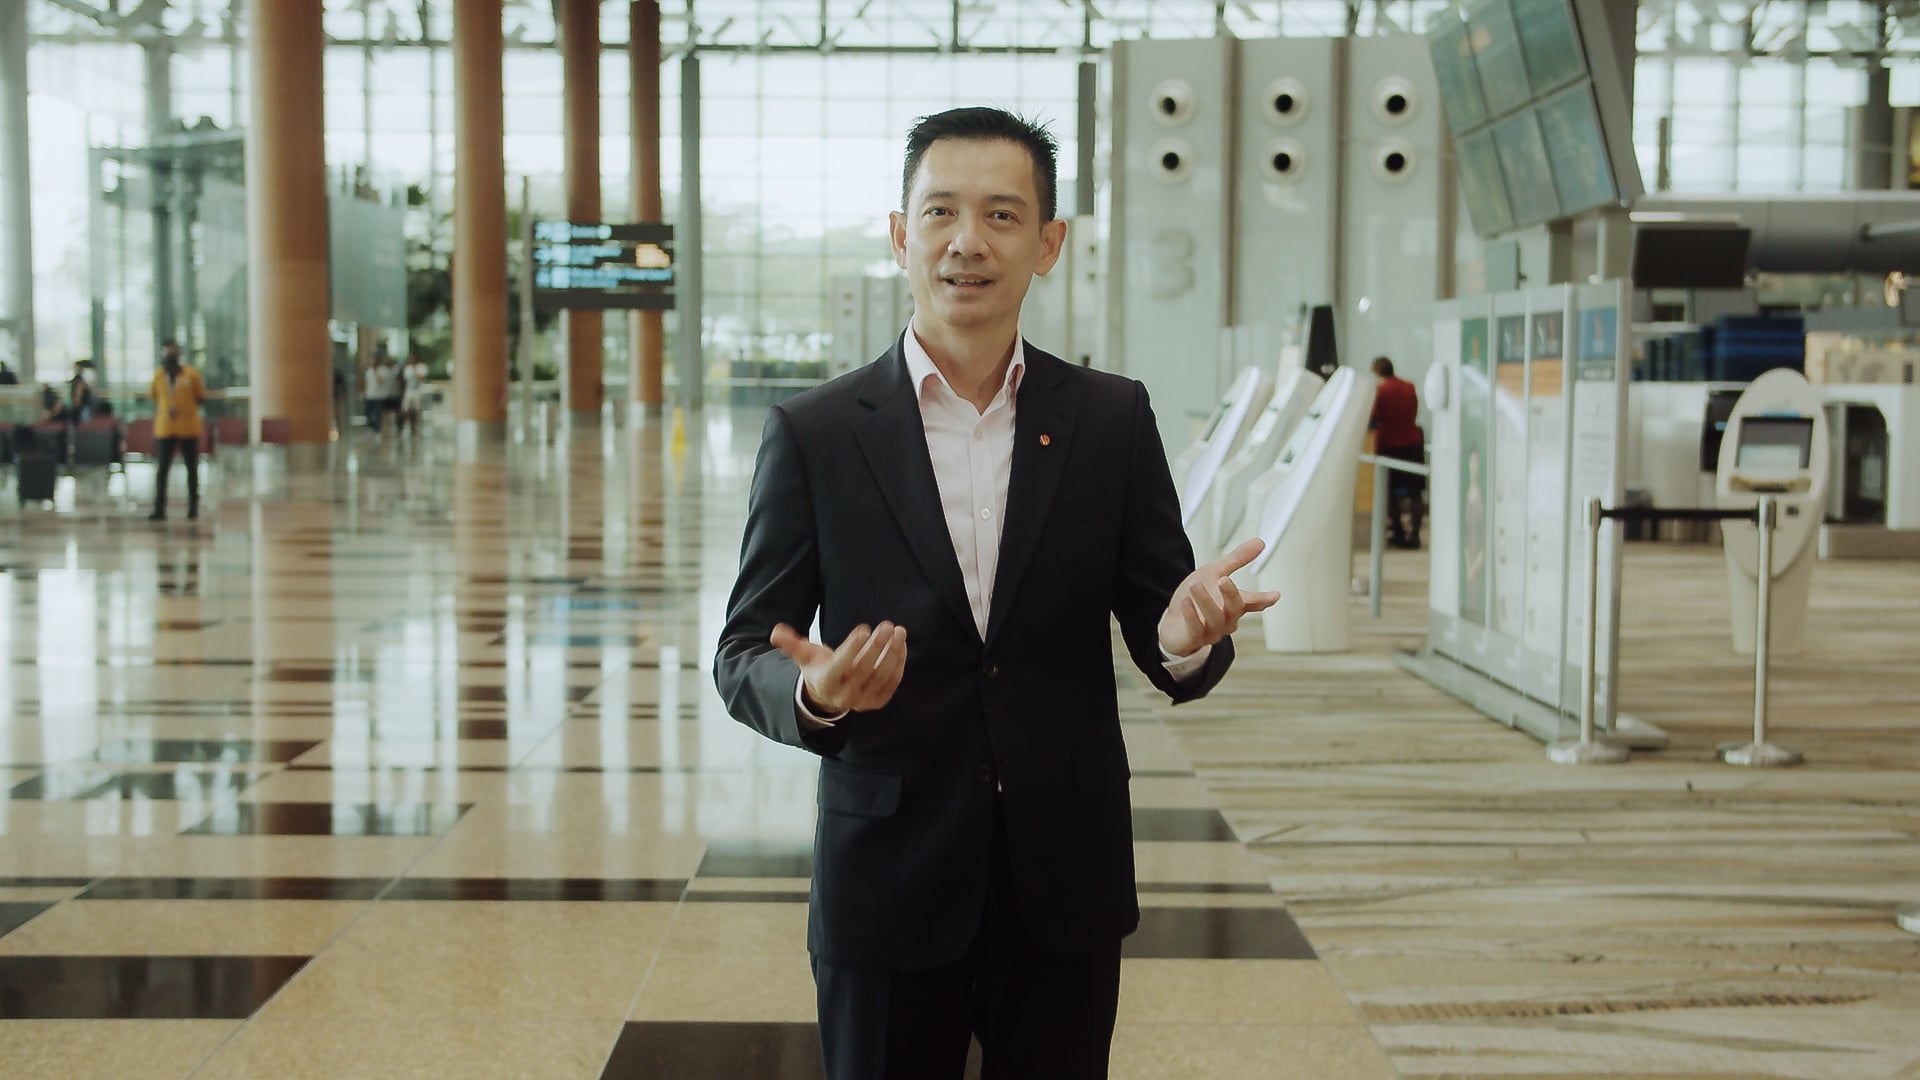 As Singapore begins to reopen its boarders for international travel, we take a quick dive into how the tourism sector has reimagined some measures to welcome our friends from all over the globe.